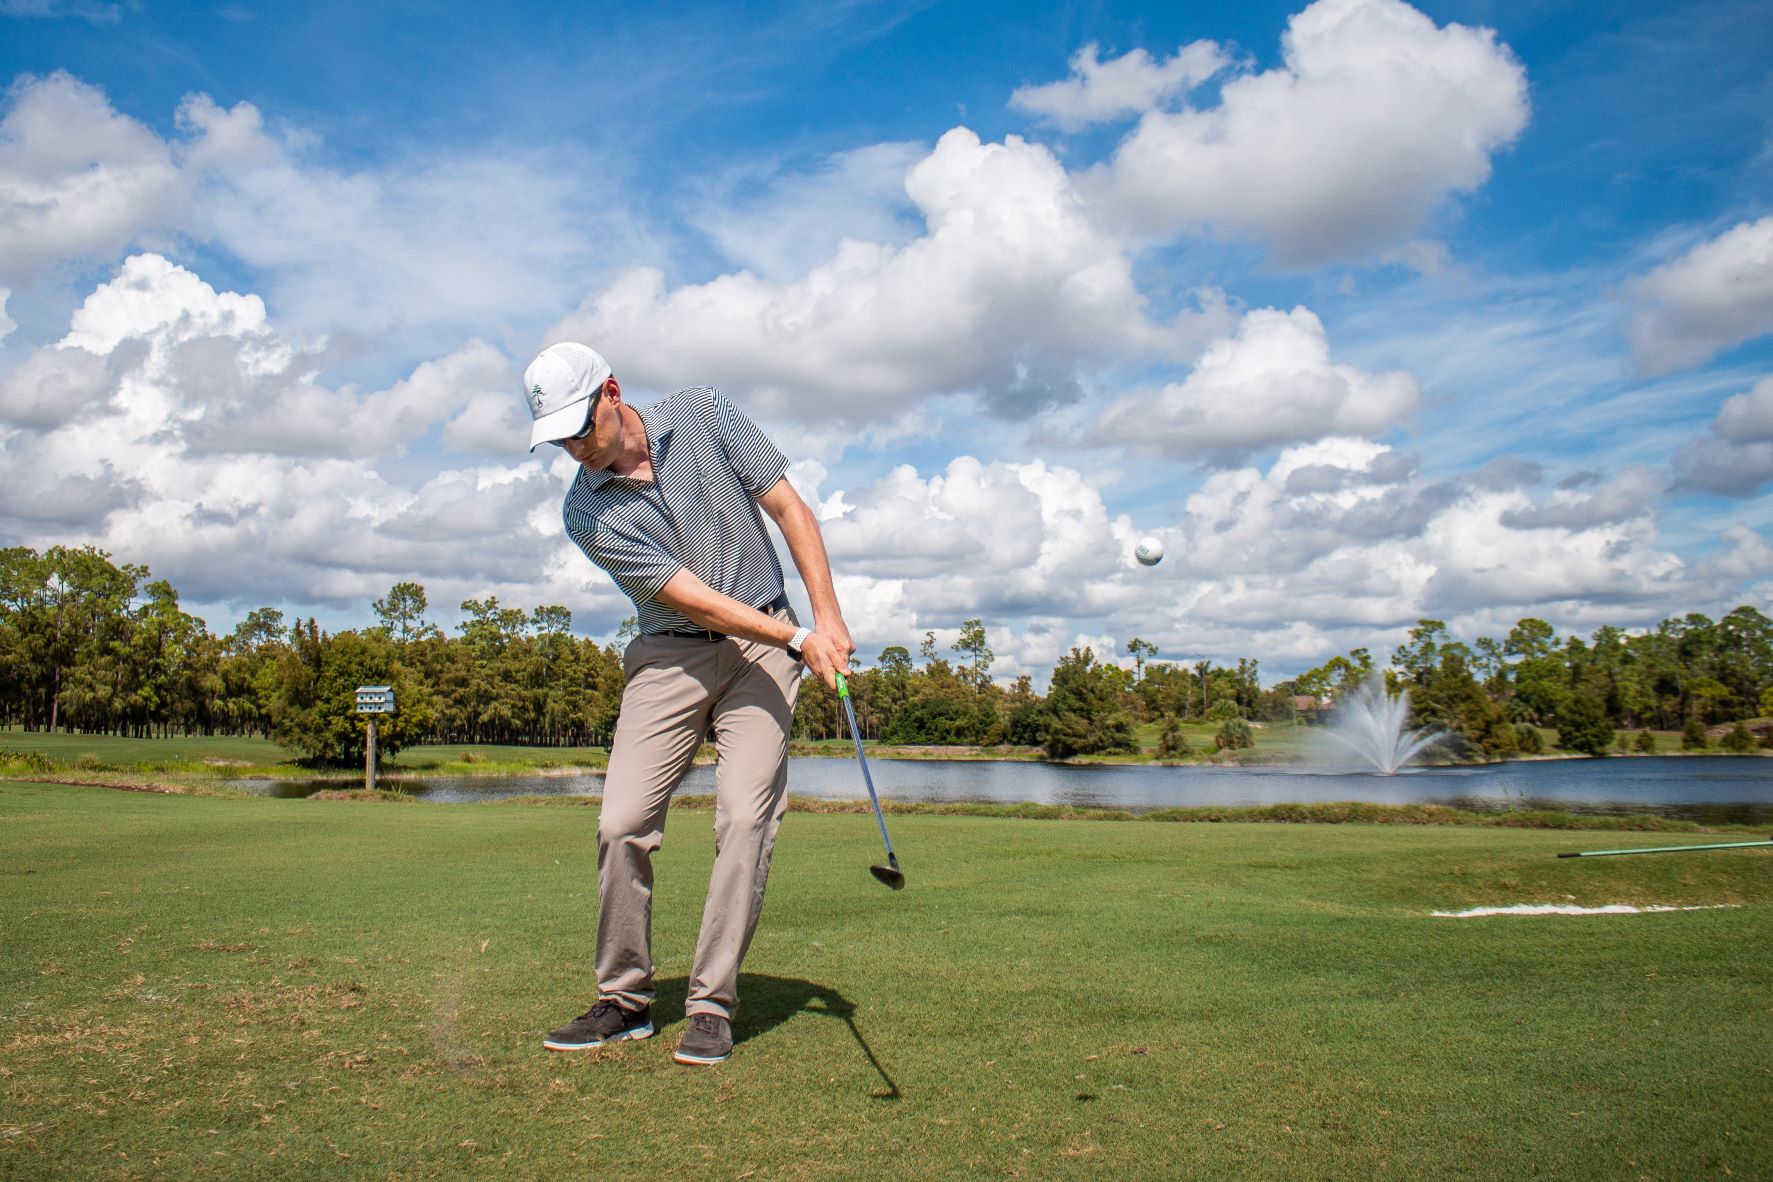 Your Golf Season is Just Beginning at Olde Cypress